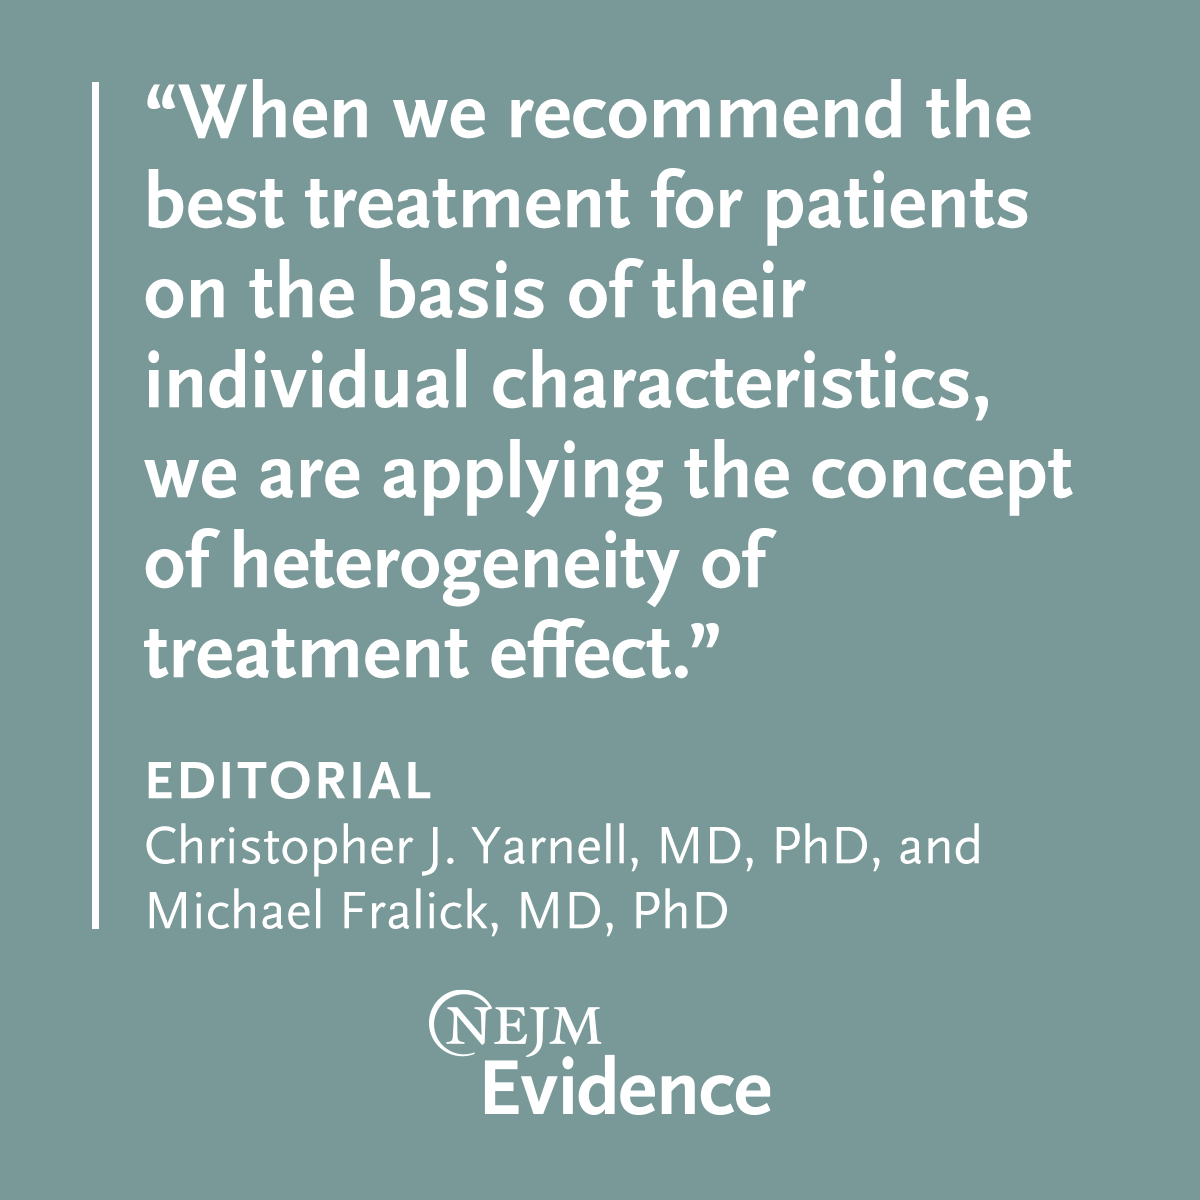 Drs. Christopher J. Yarnell & @FralickMike review the article by Desai et al. describing methods for individualized treatment effect prediction models using TOPCAT data, calling it an informative example of exploring heterogeneity of treatment effects. eviden.cc/3TuT2DP